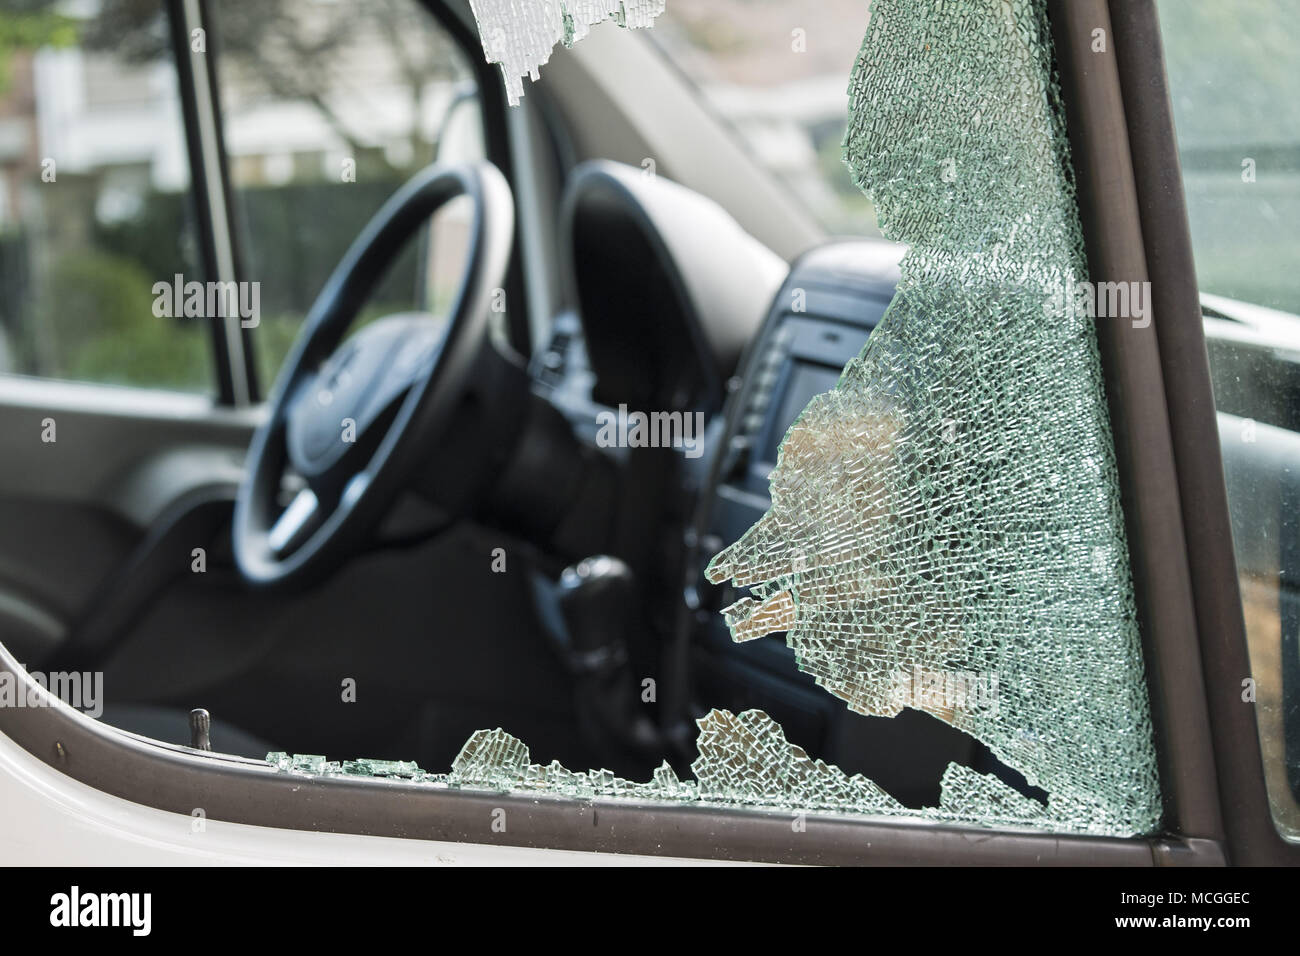 Vancouver, British Columbia, Canada. 30th Sep, 2017. A smashed van window: another ''smash and grab'' theft from a vehicle. Credit: Bayne Stanley/ZUMA Wire/Alamy Live News Stock Photo